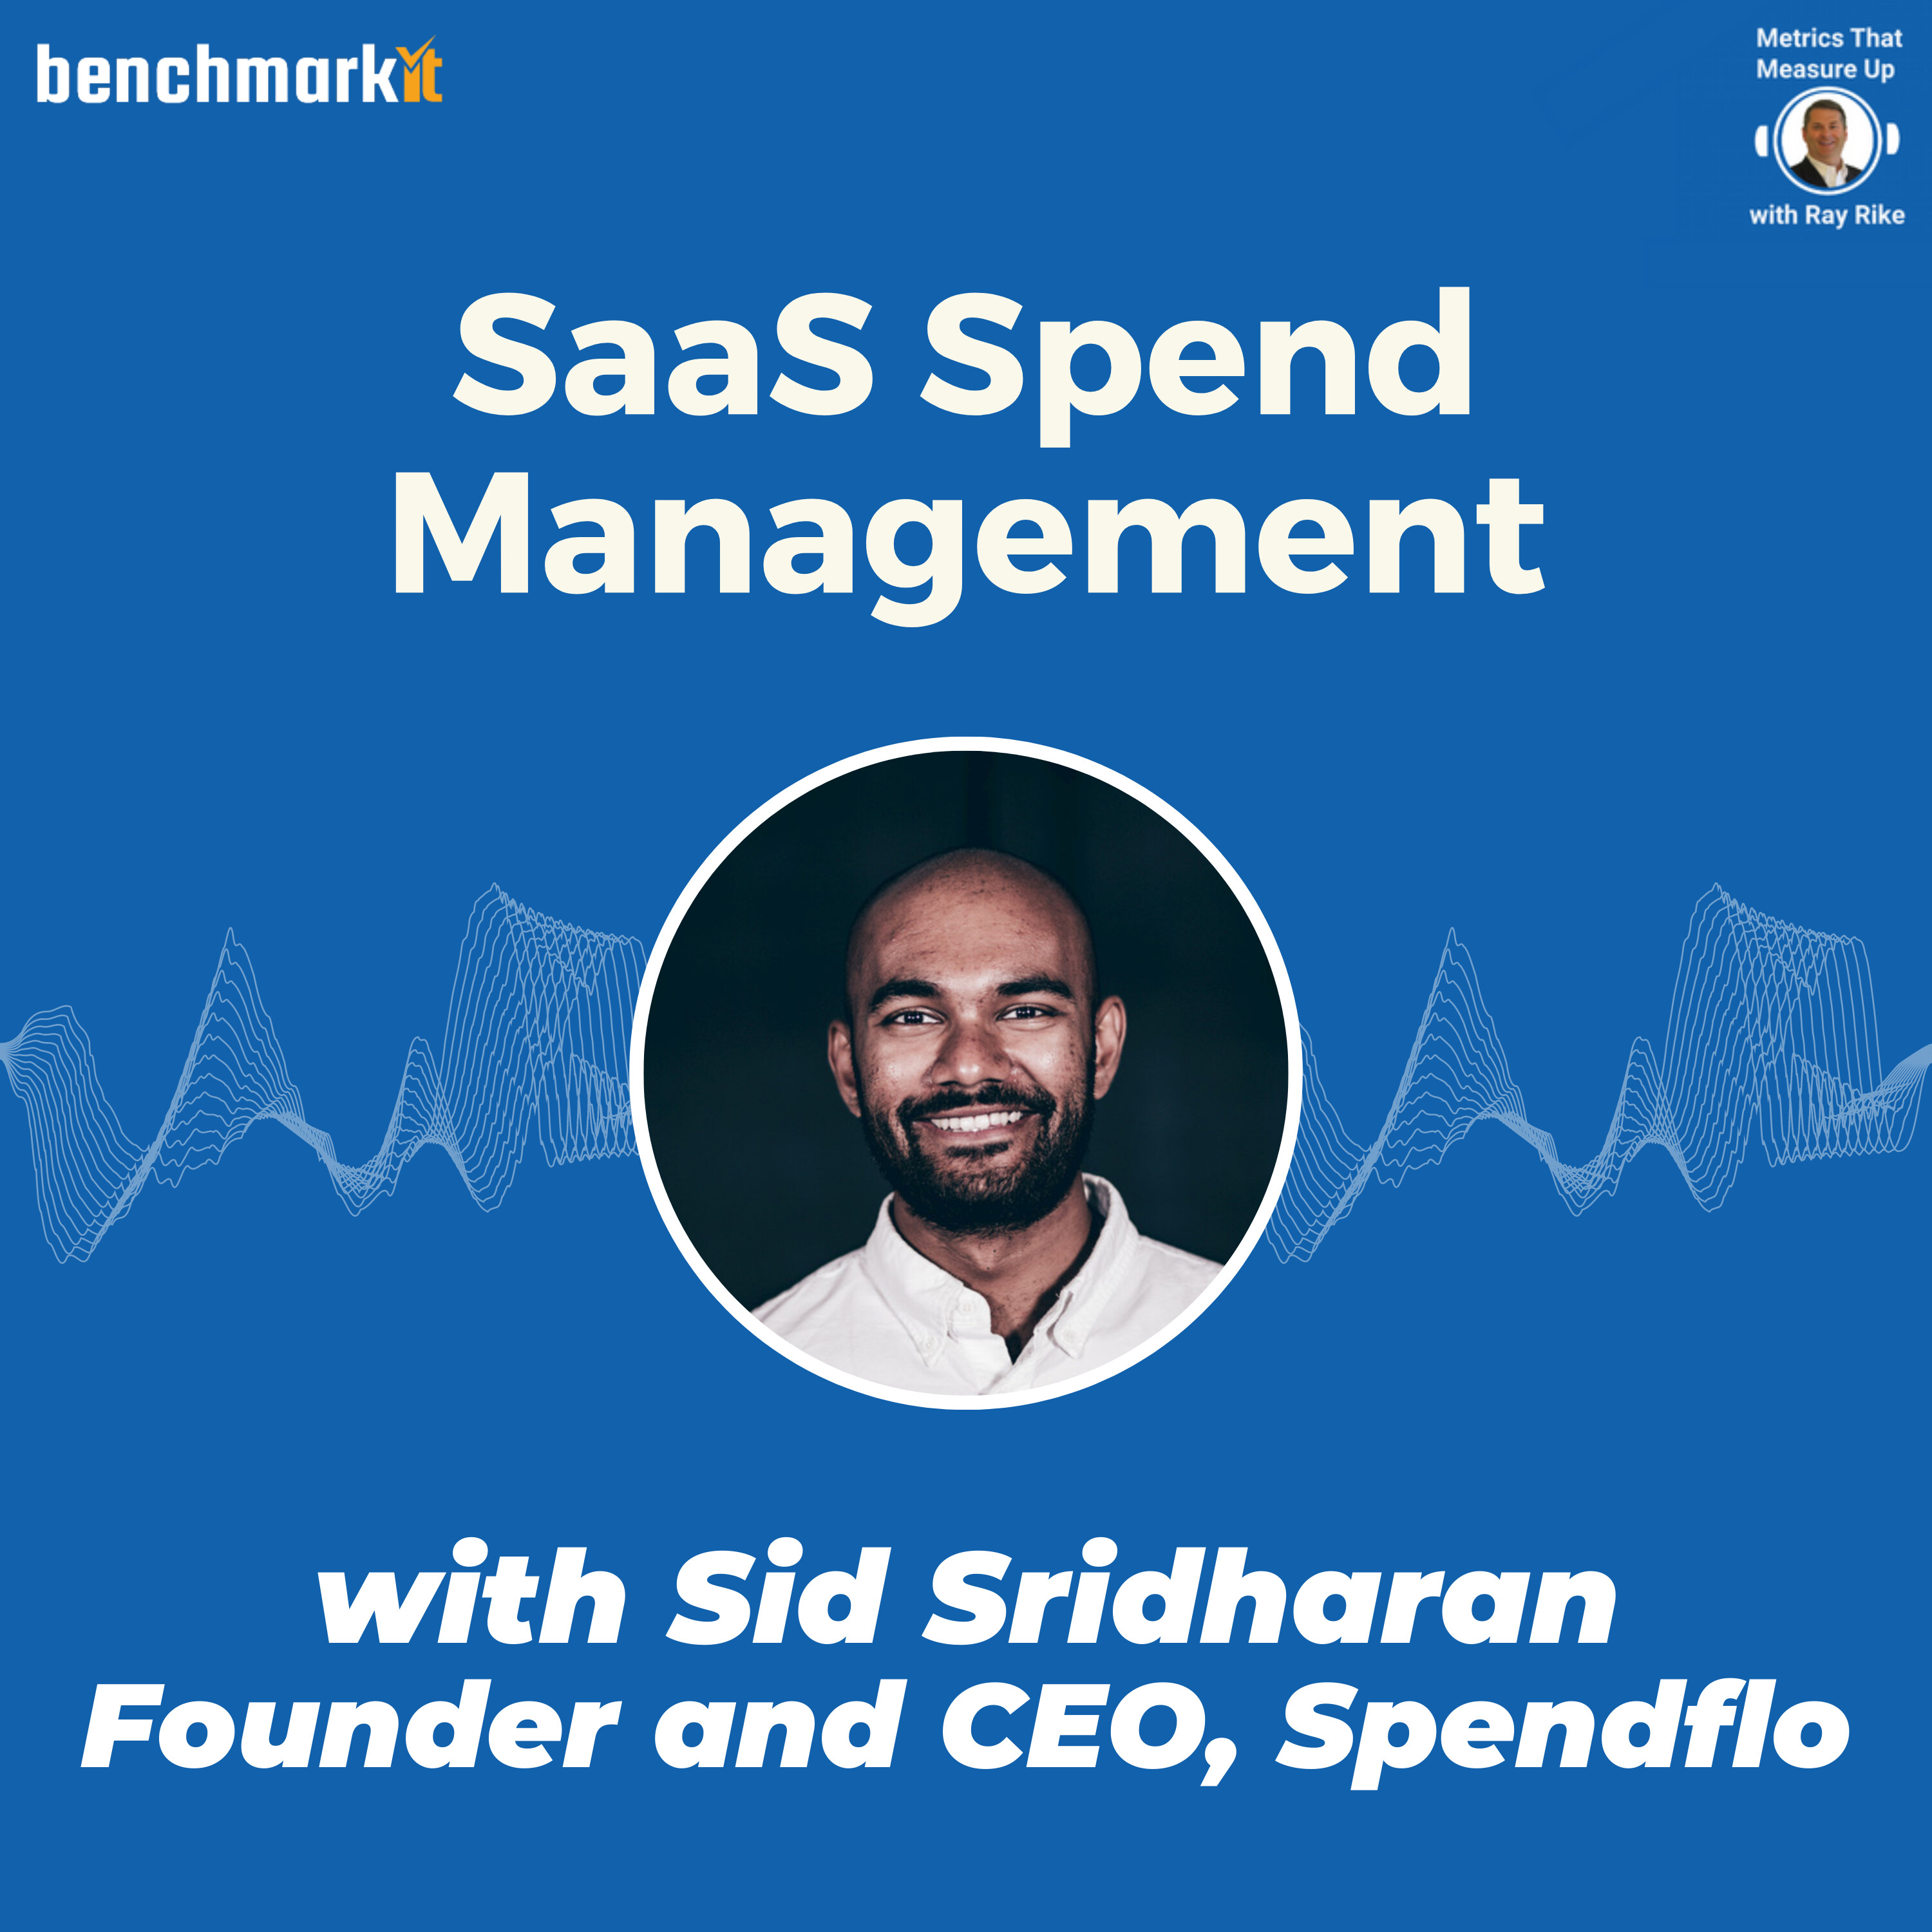 Discussing the Benefits of SaaS Spend Management - with Sid Sridharan, Founder and CEO, Spendflo